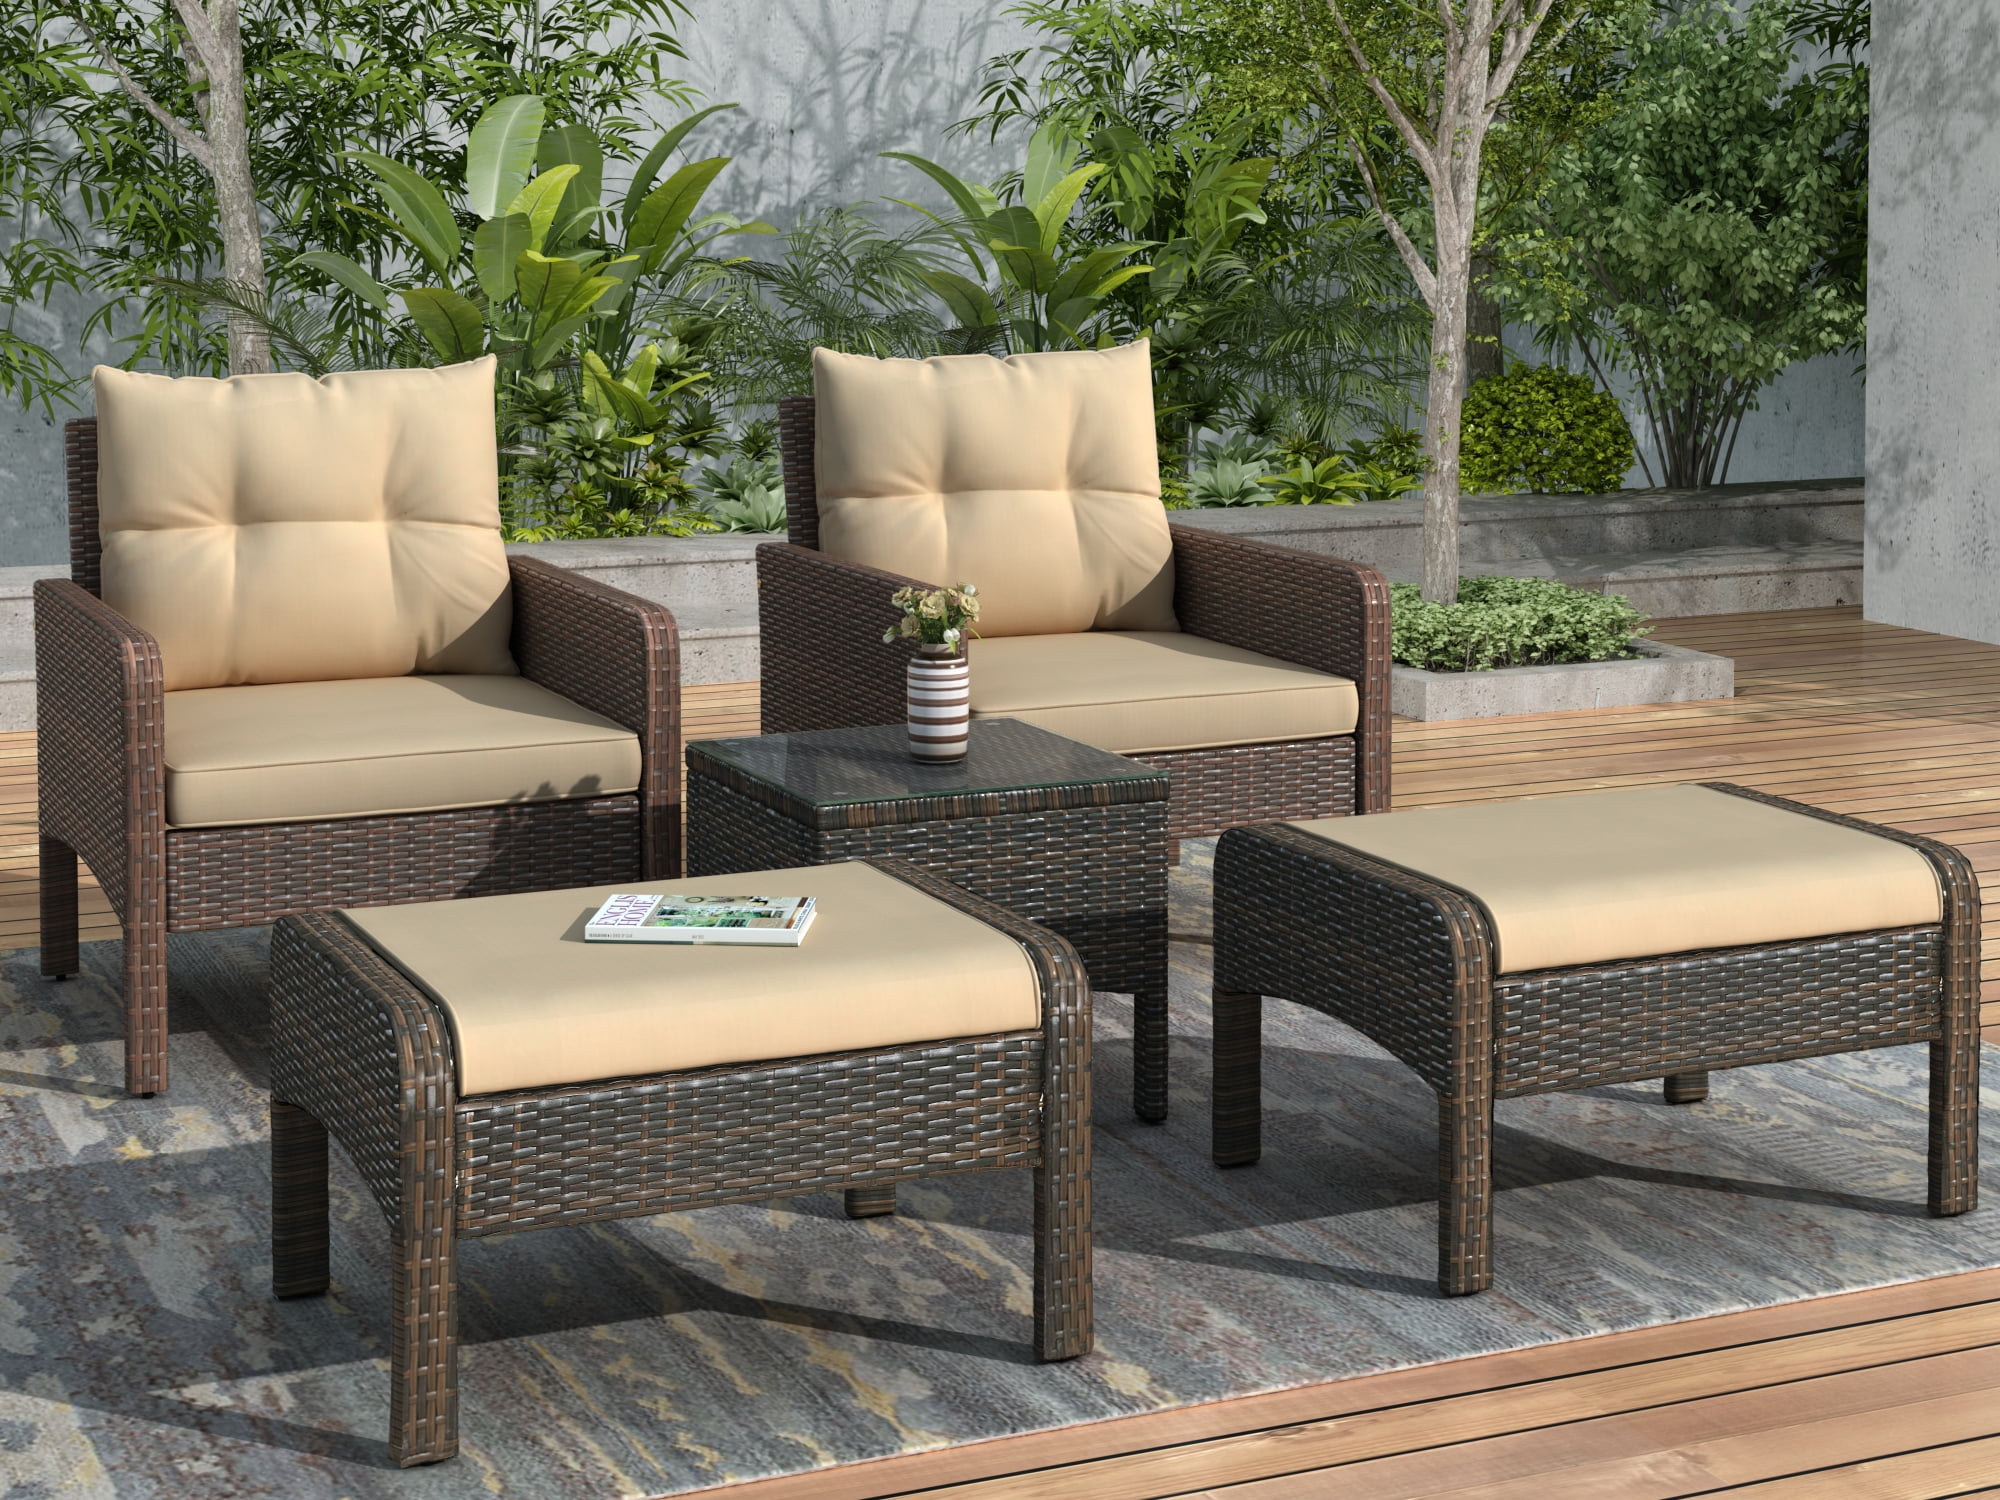 Outdoor Bistro Chairs Set for Patio, BTMWAY All-weather Rattan Outdoor